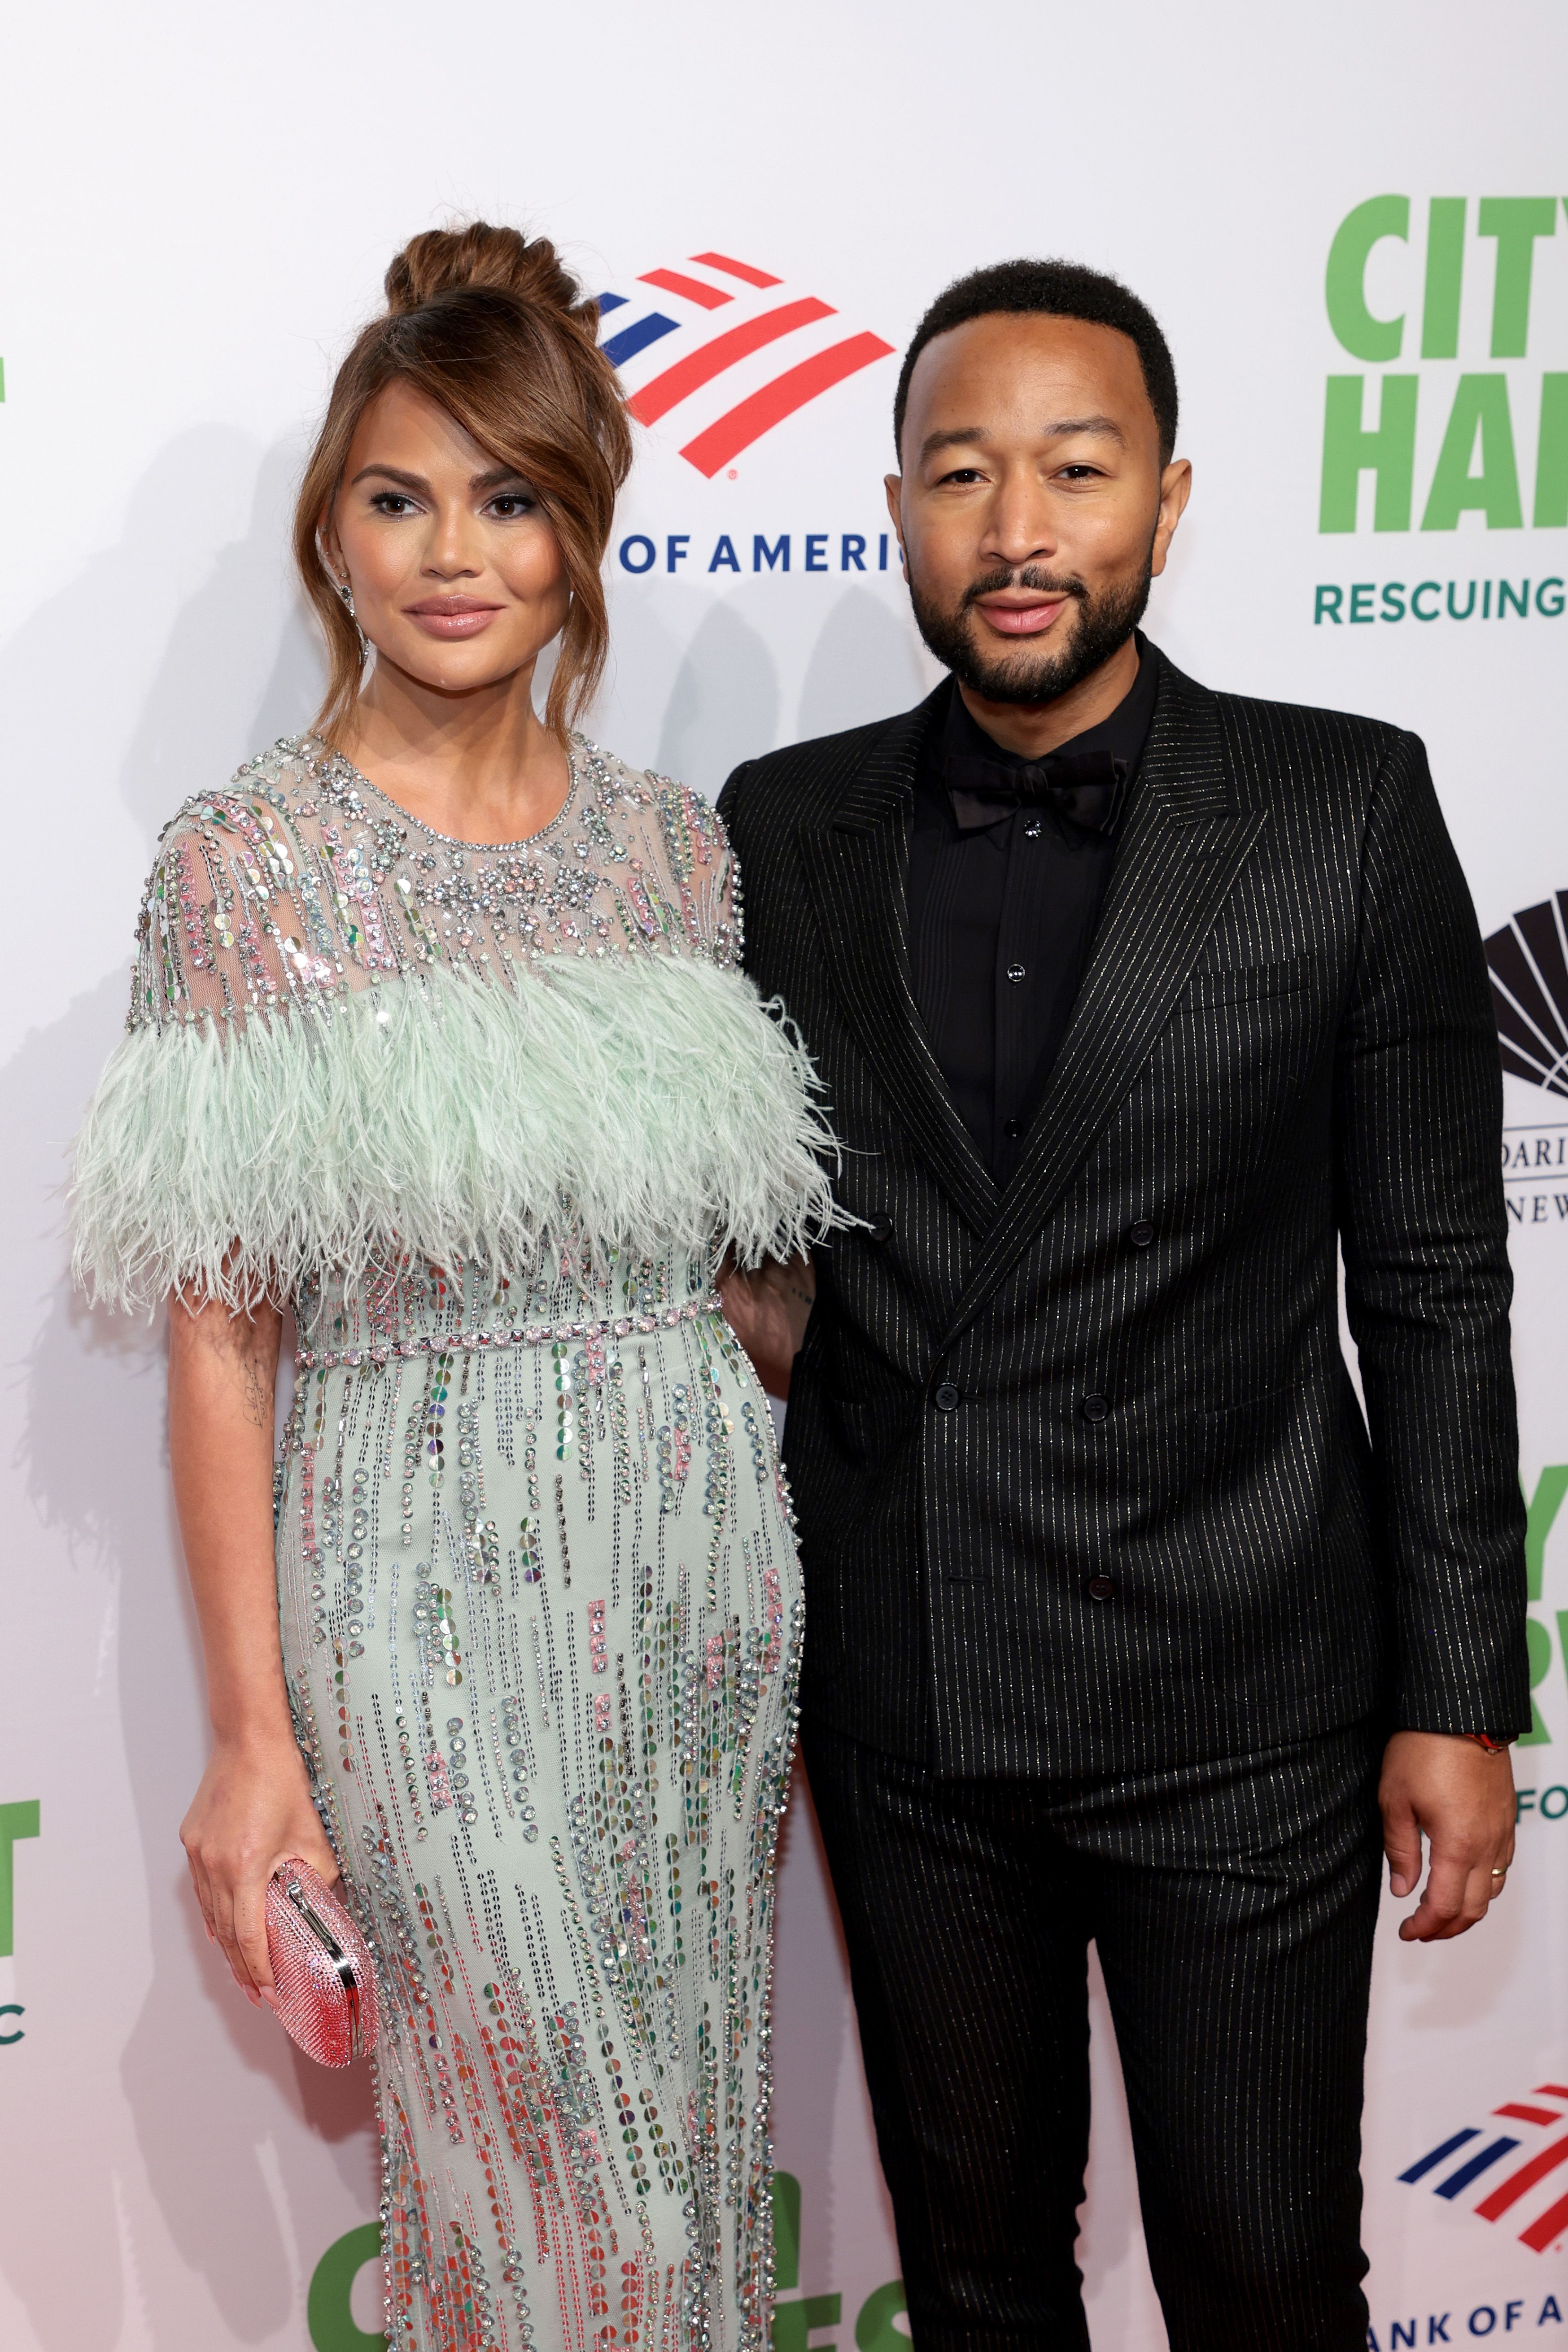 Model Chrissy Teigen and singer John Legend attending the City Harvest Presents The 2022 Gala: Red Supper Club at Cipriani 42nd Street on April 26, 2022 in New York City.┃Source: Getty Images